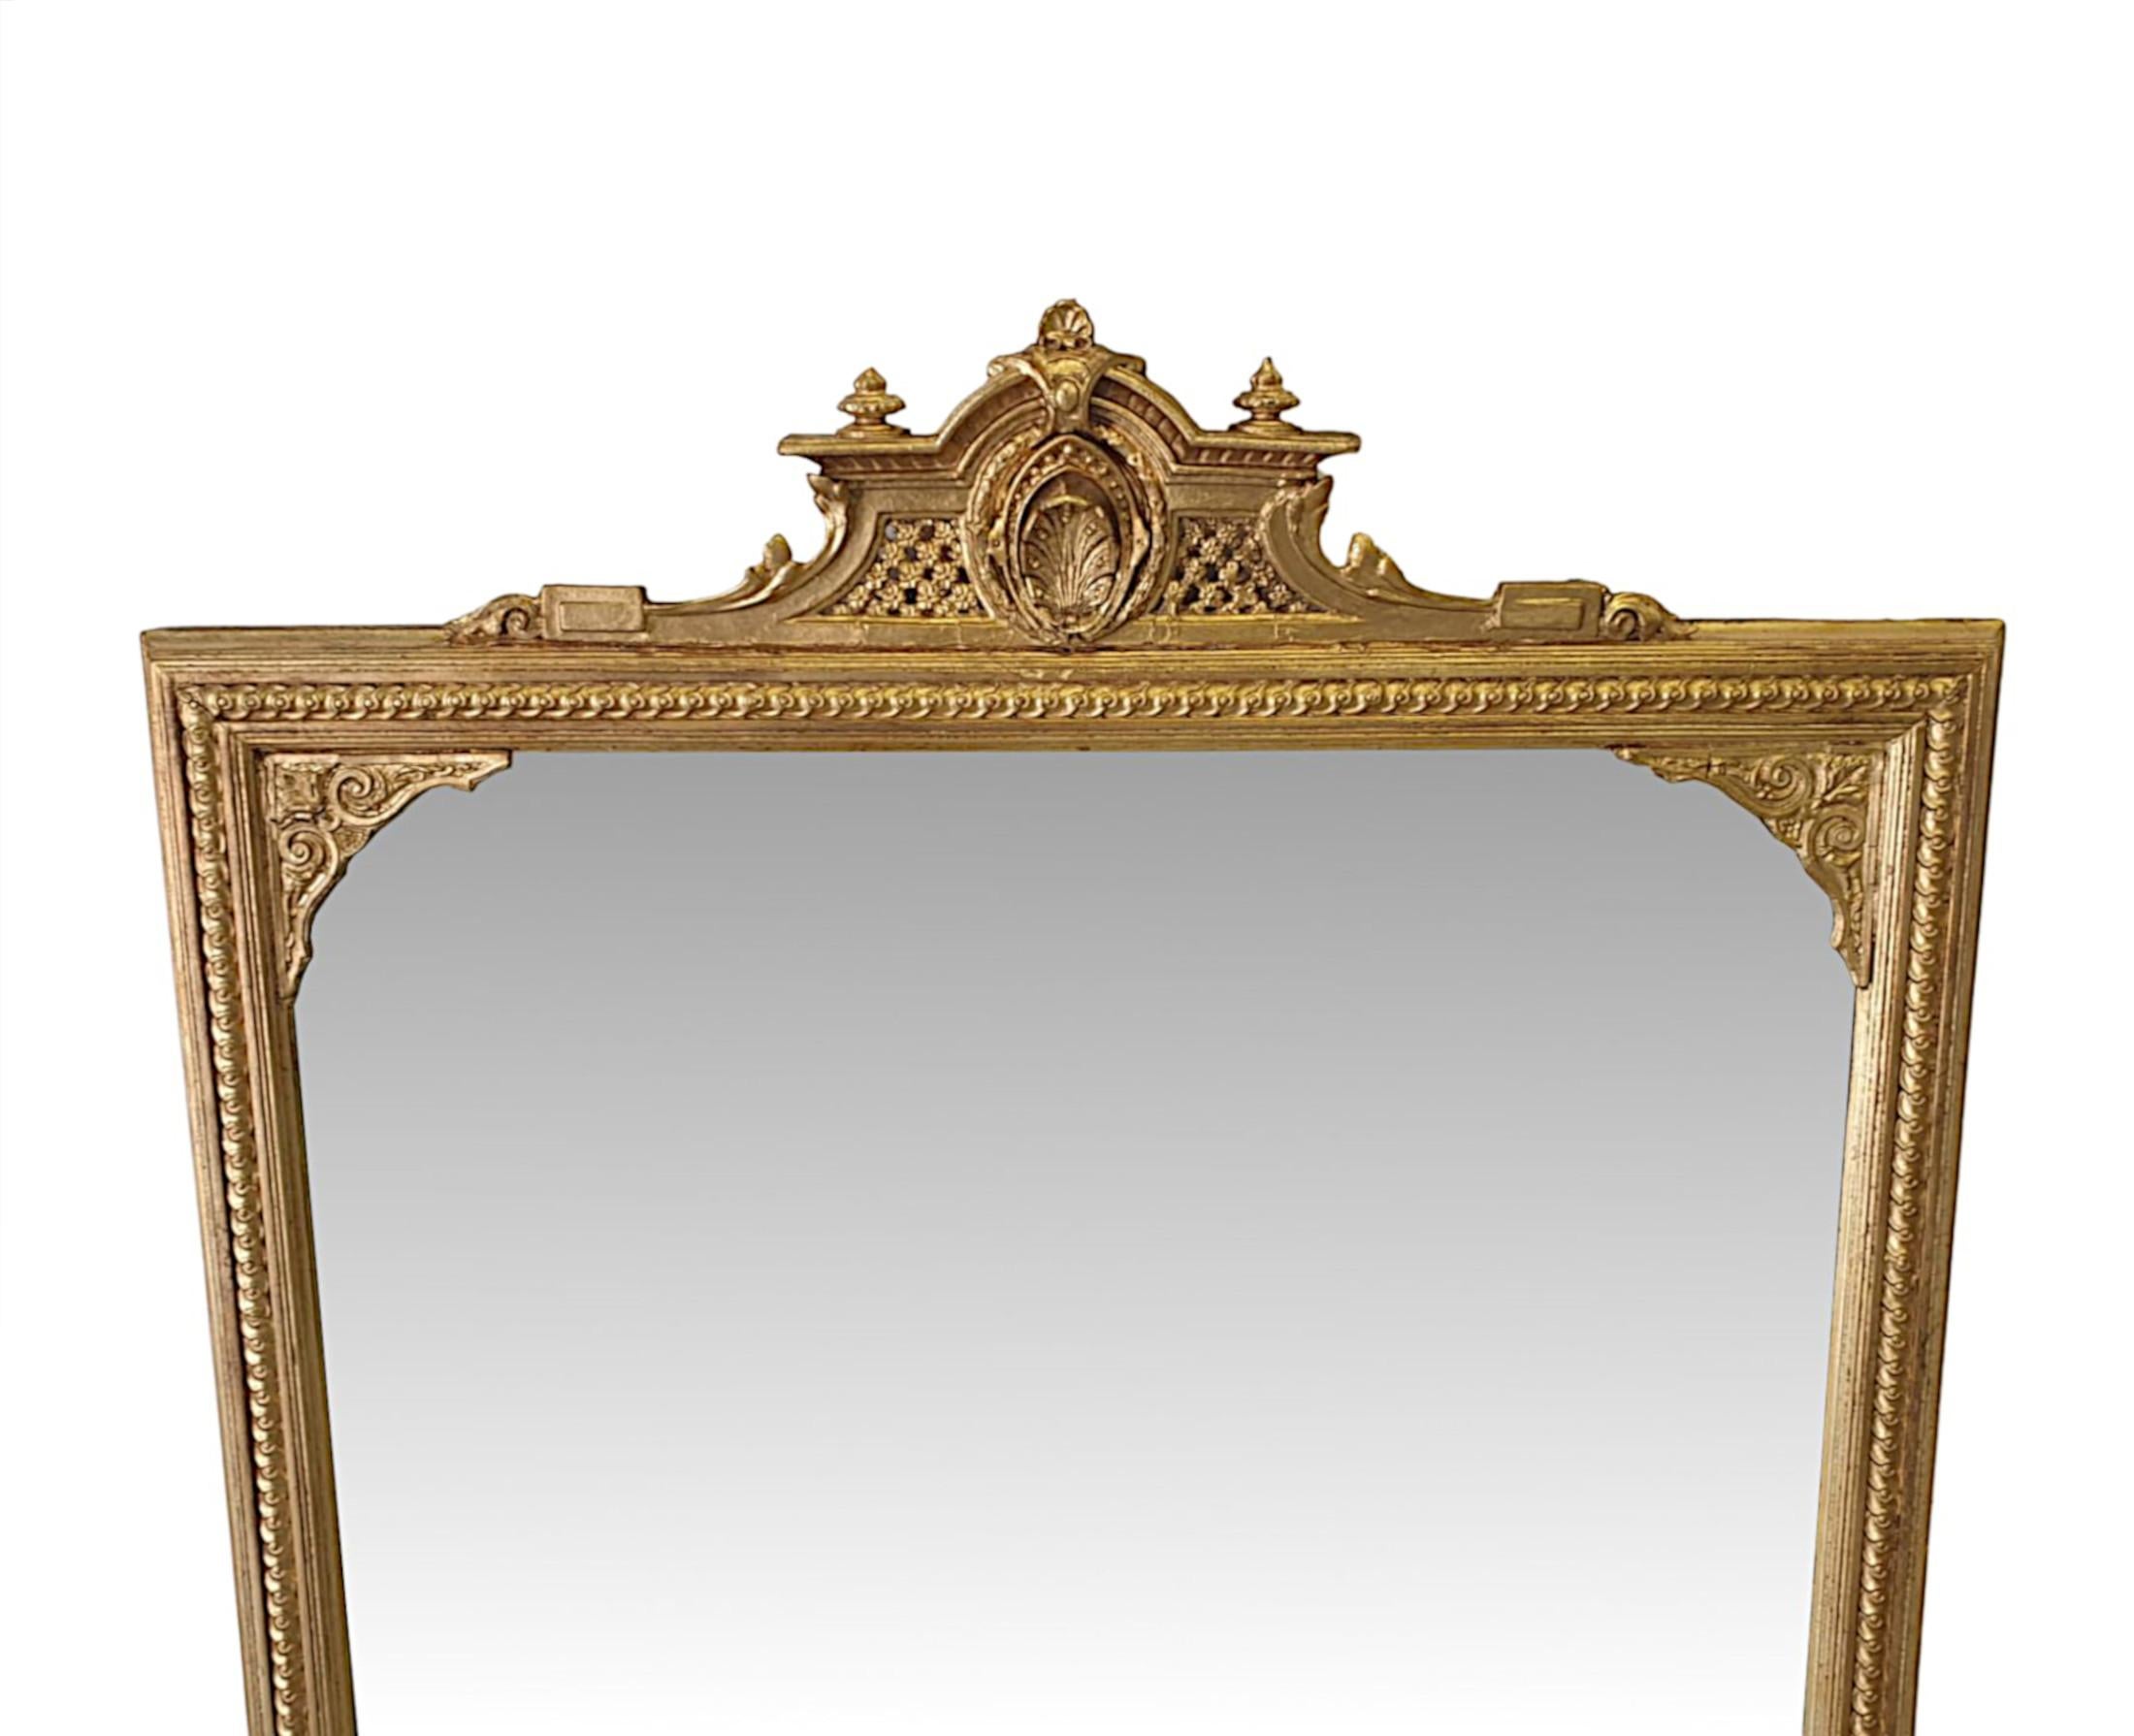 A fine 19th Century giltwood overmantle mirror. The mirror glass plate set within a stunning hand carved giltwood, moulded and reeded frame of rectangular form with egg and dart border and foliate detail to the shaped top corner returns. Surmounted